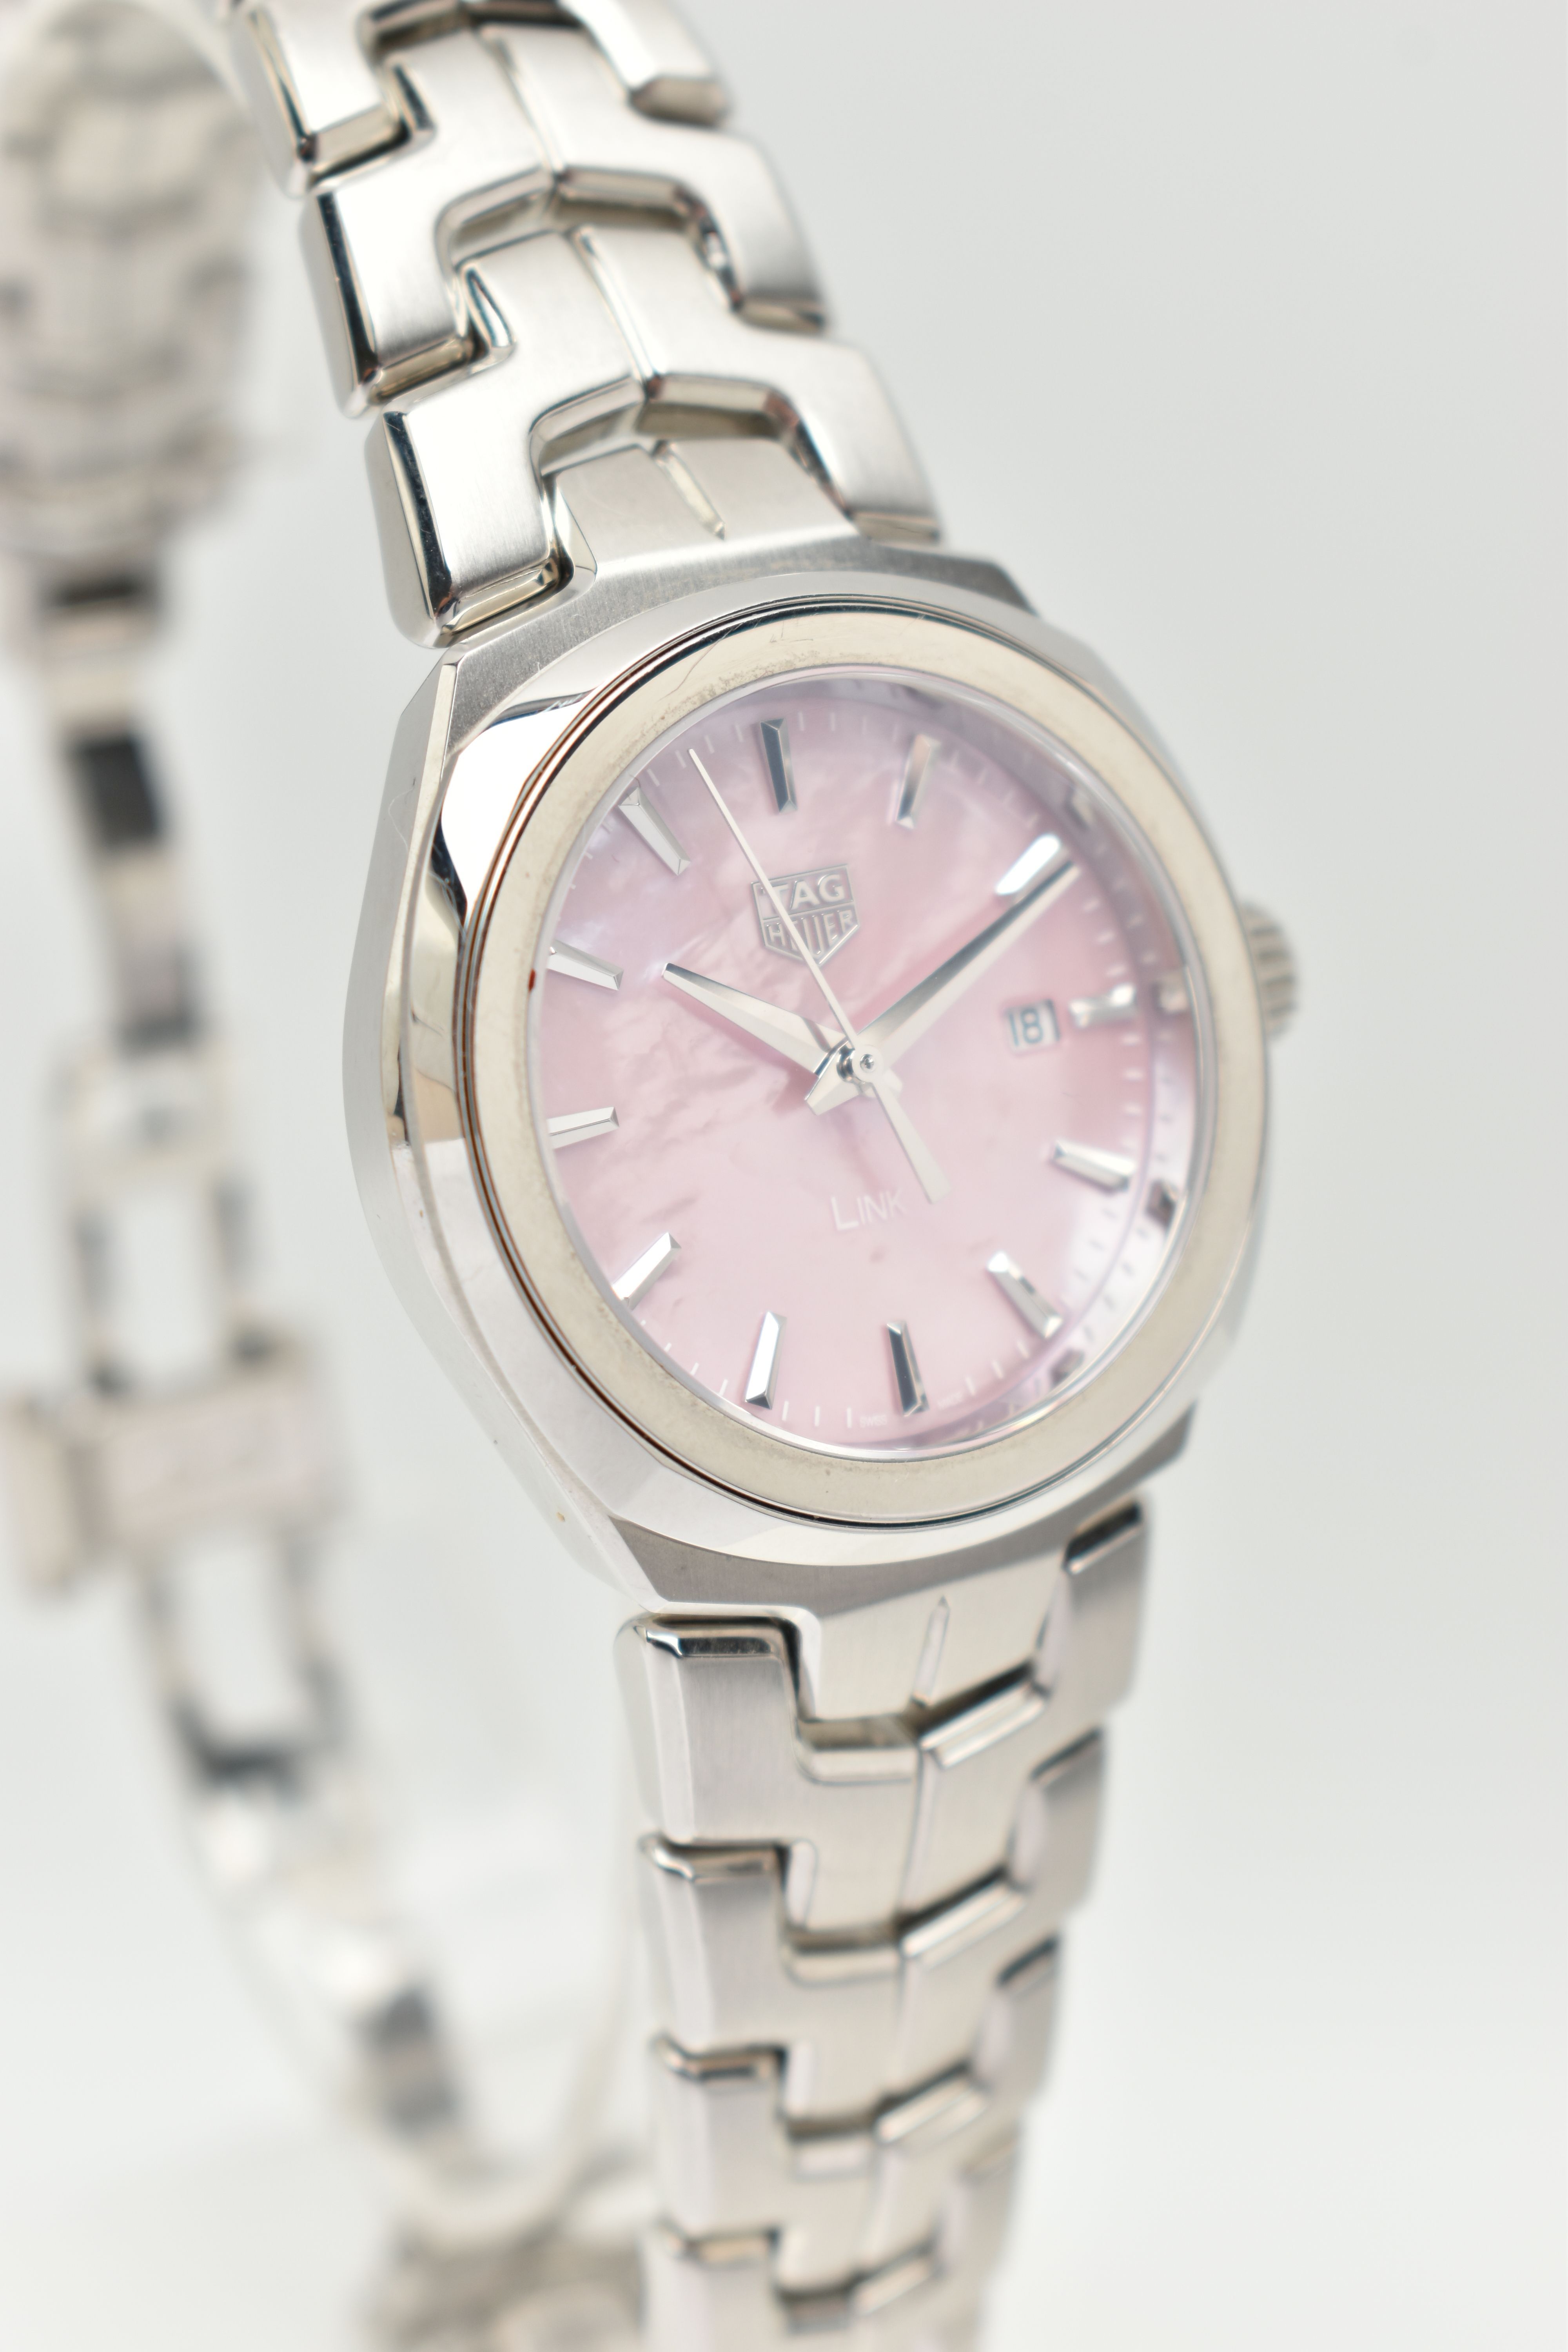 A 'TAG HEUER' LINK LADIES WRISTWATCH, quartz movement, pink dial signed 'Tag Heuer Link', baton - Image 3 of 10